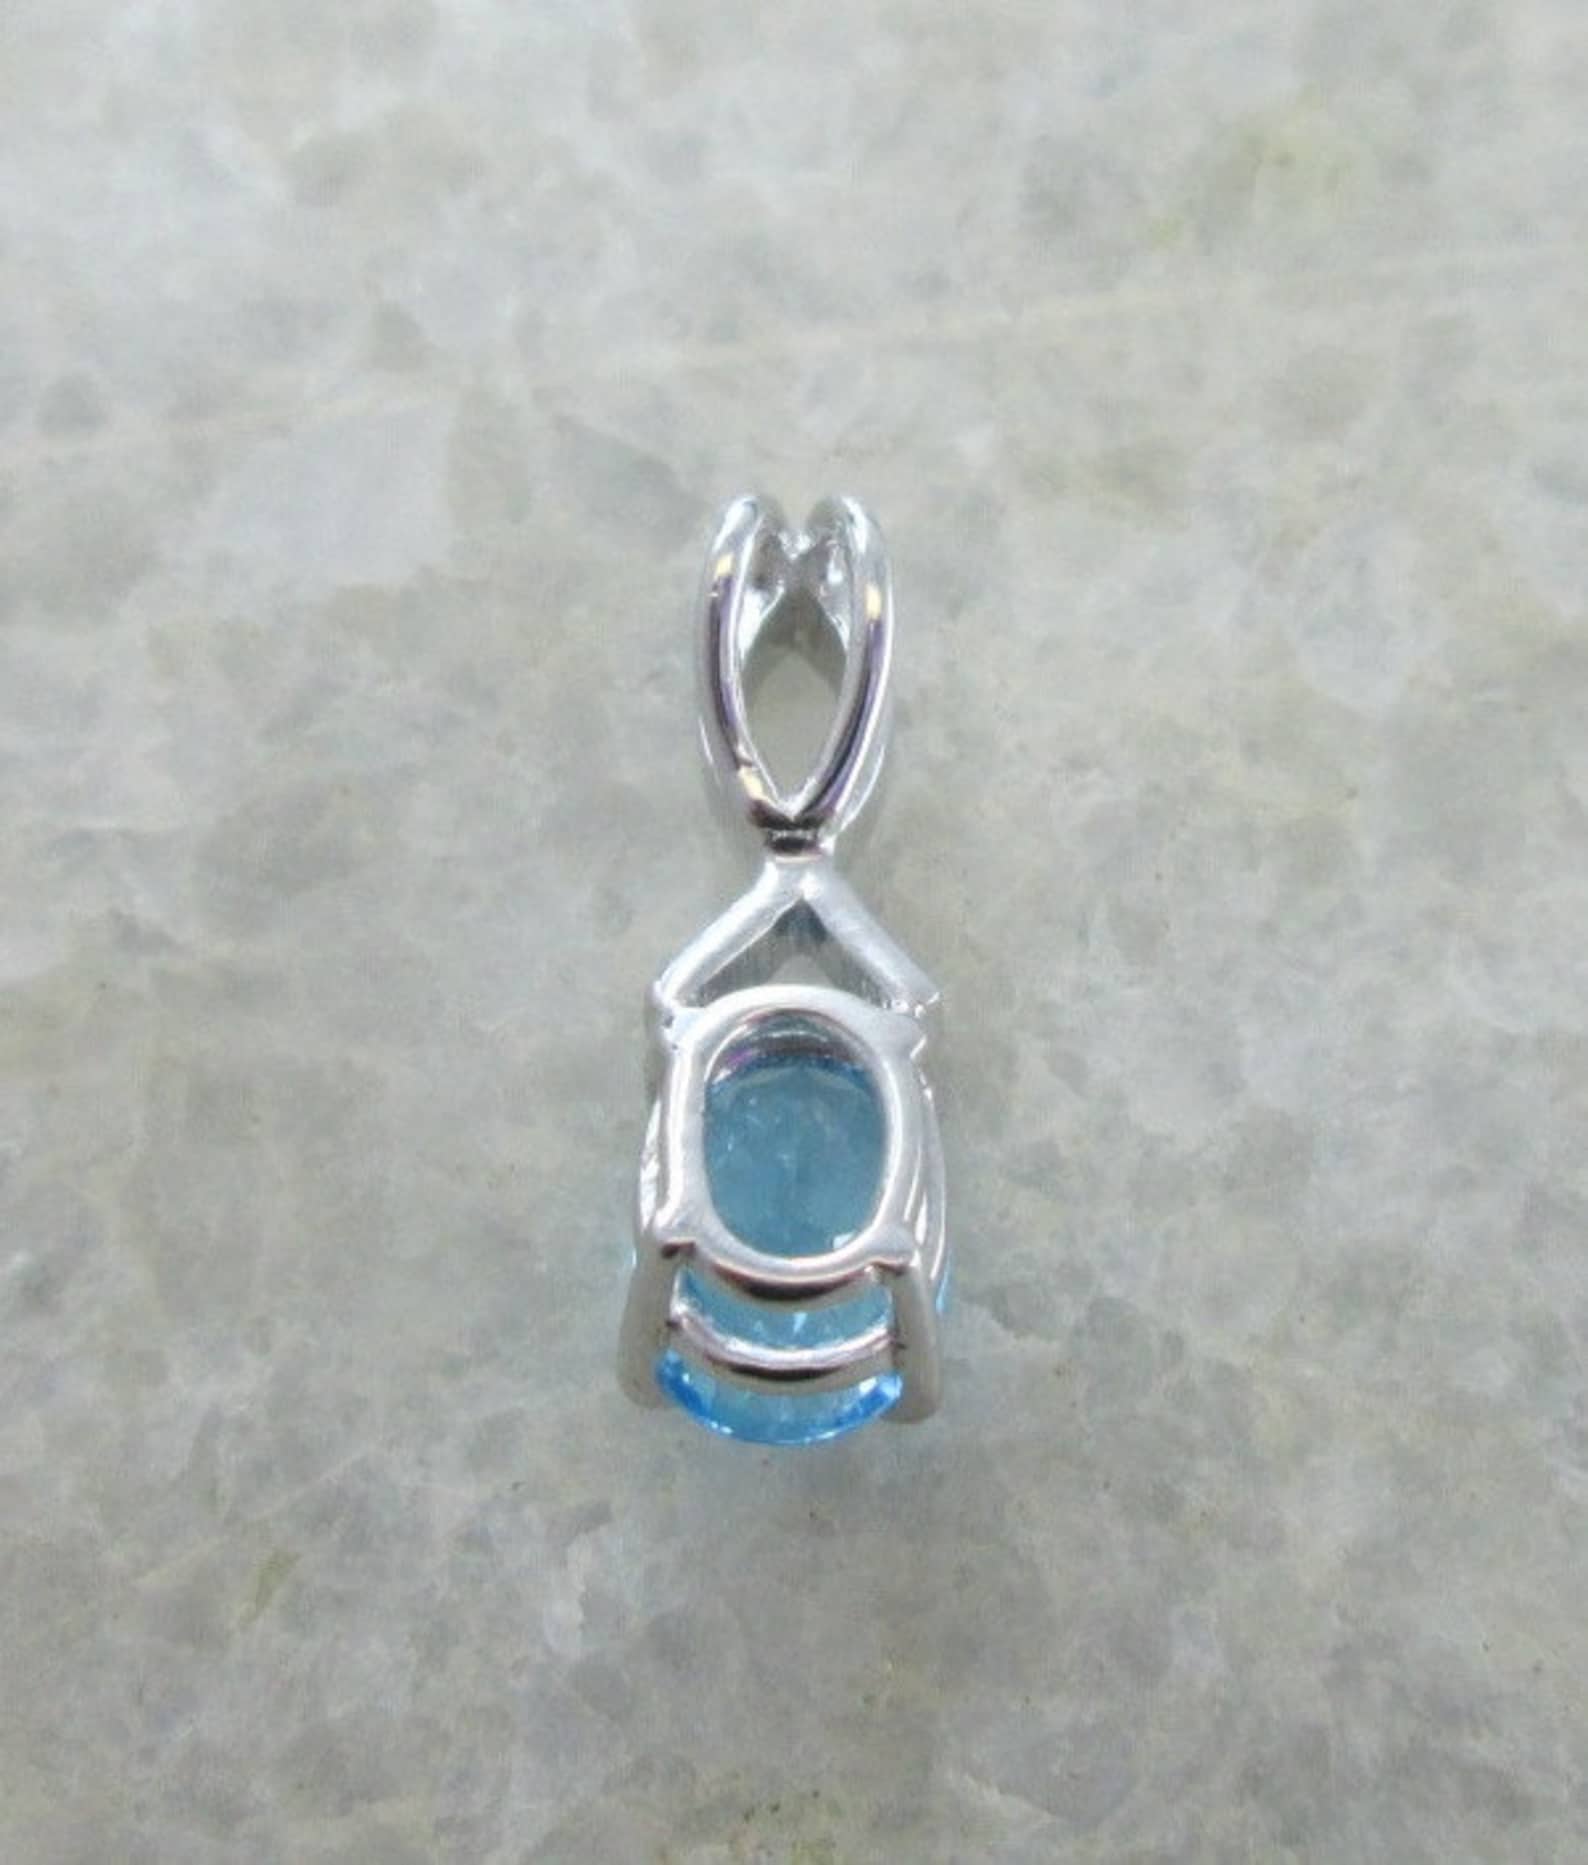 Swiss Blue Topaz Pendant 8x6mm Oval Natural Gemstone Solitaire - Etsy